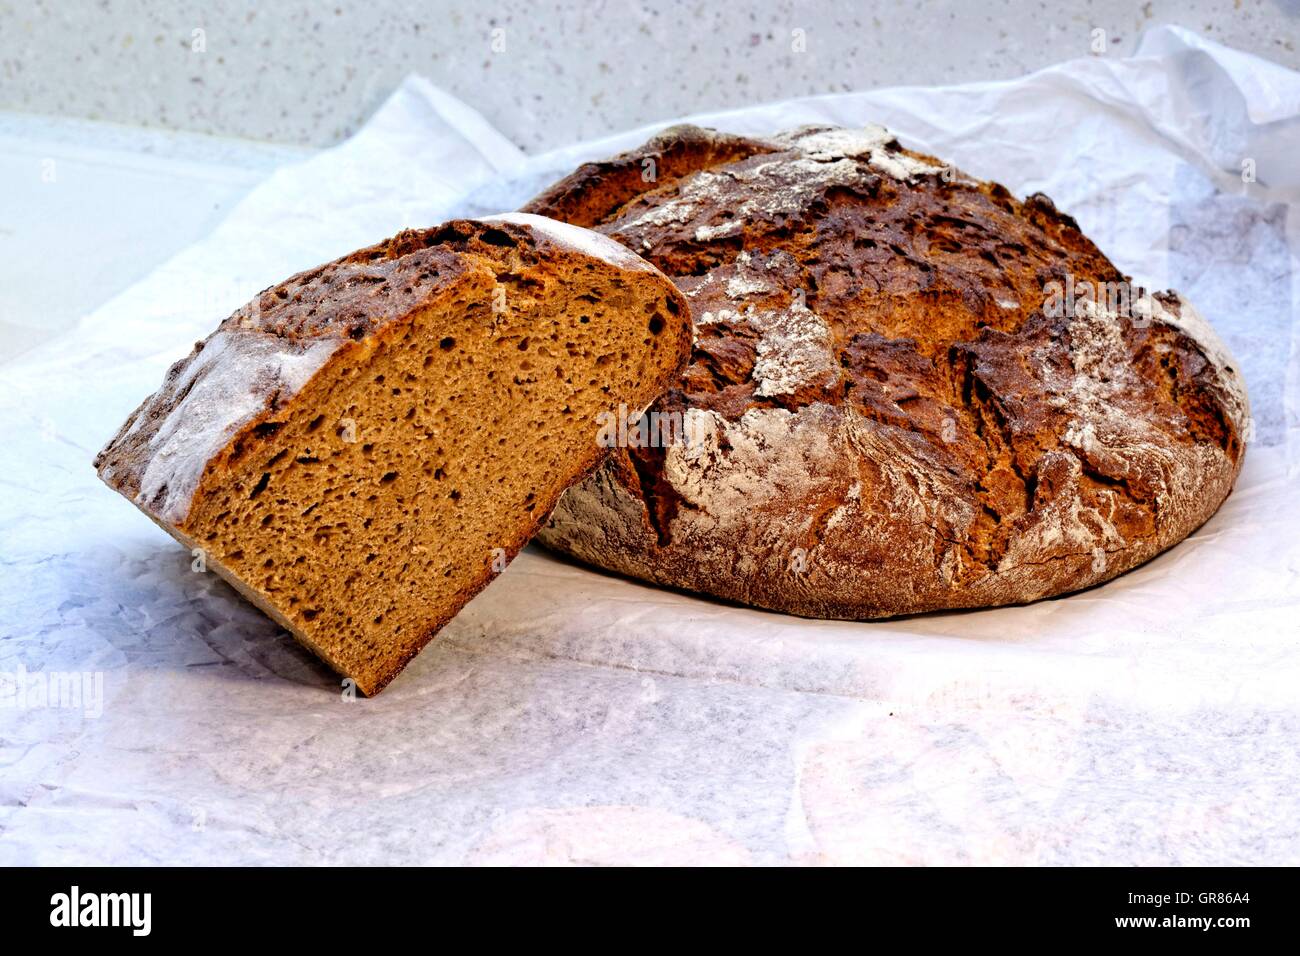 Rustic Farmhouse Bread Made From Rye Flour And Dinkelmalzmehl Stock Photo